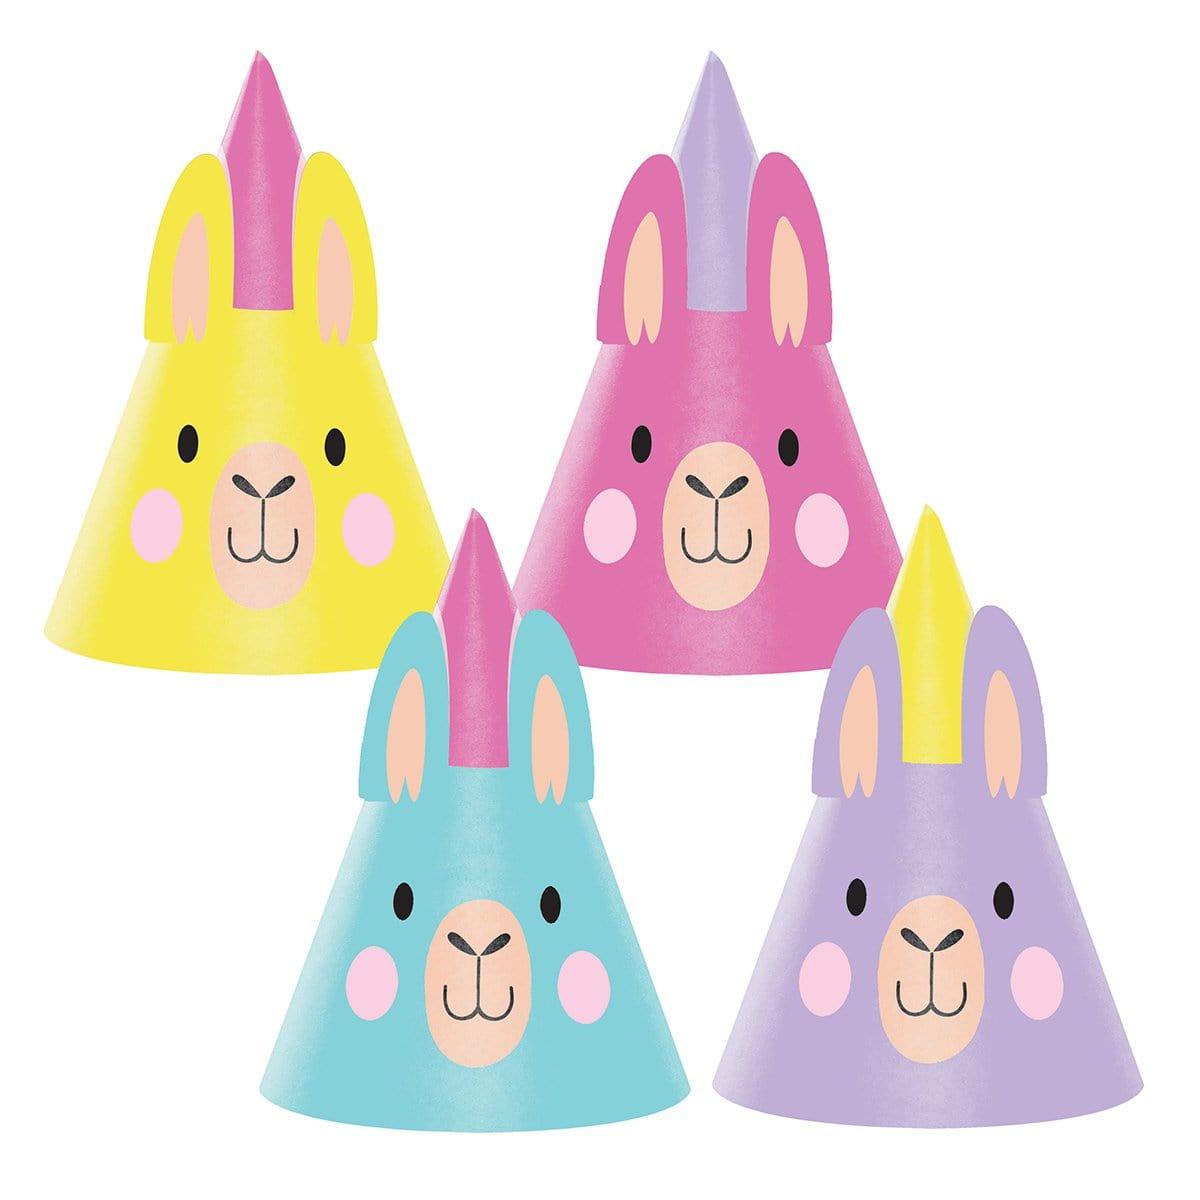 Buy Kids Birthday Llama Party party hats, 8 per package sold at Party Expert